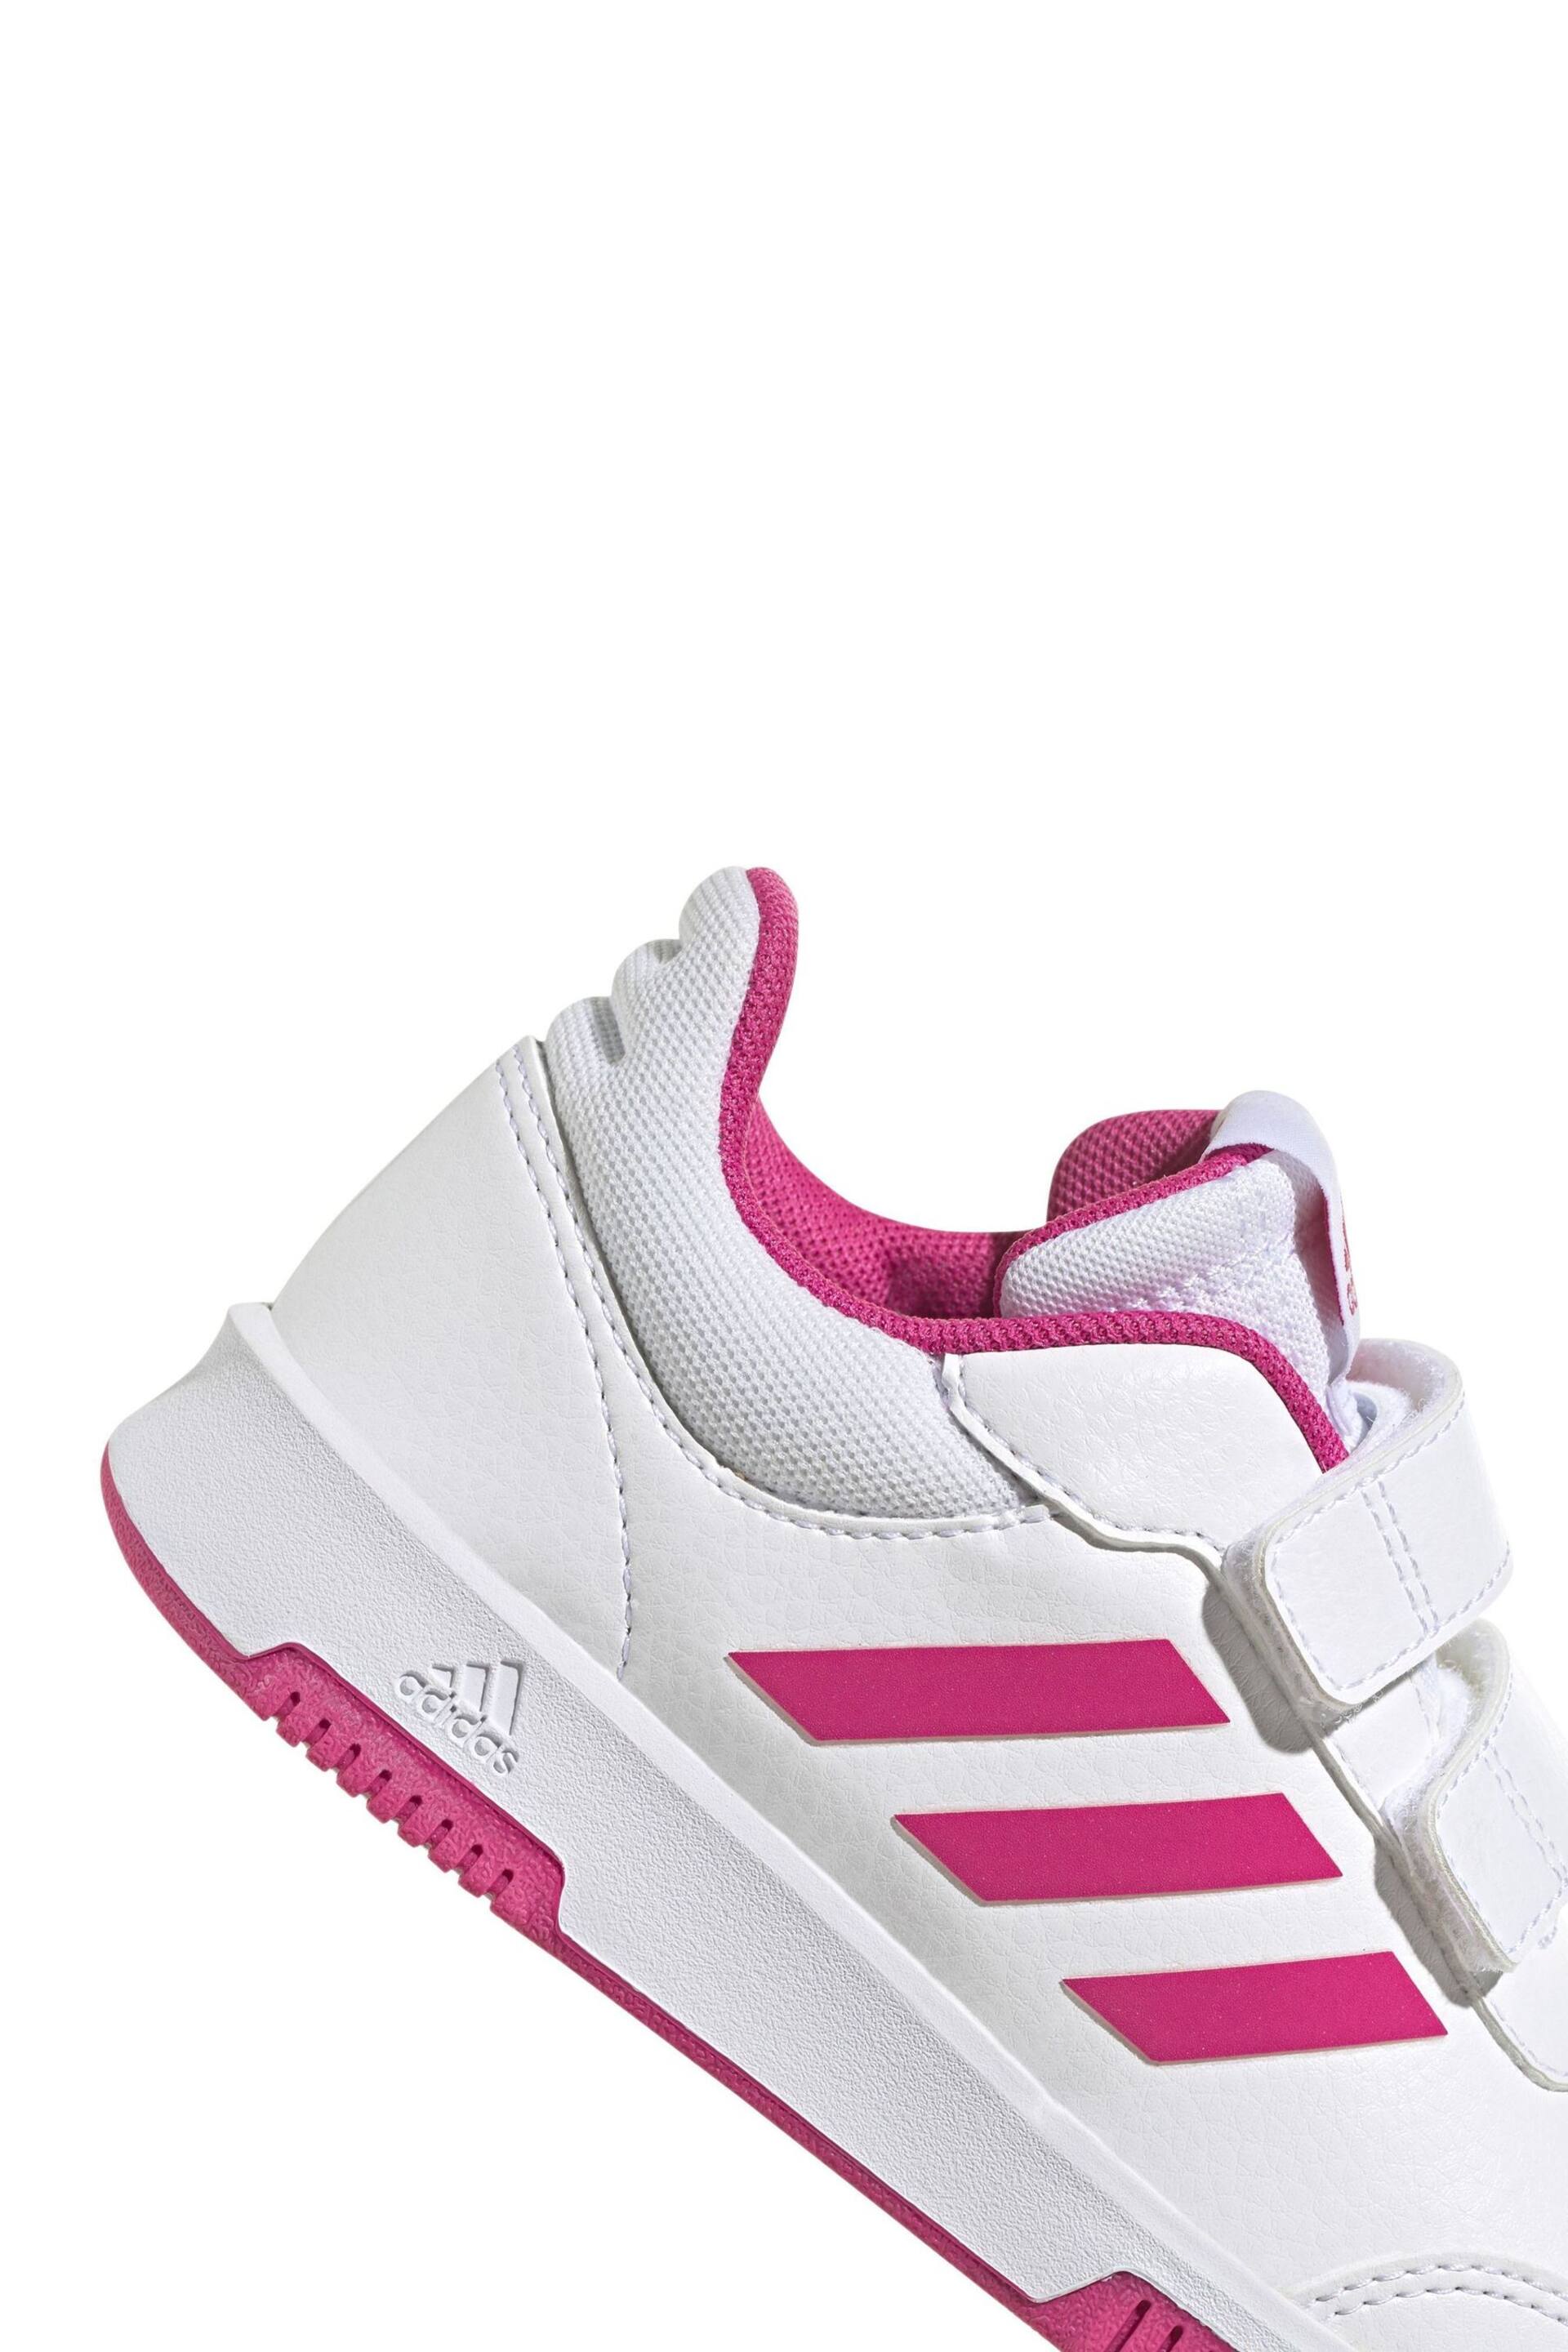 adidas White/Pink Tensaur Hook and Loop Shoes - Image 9 of 9